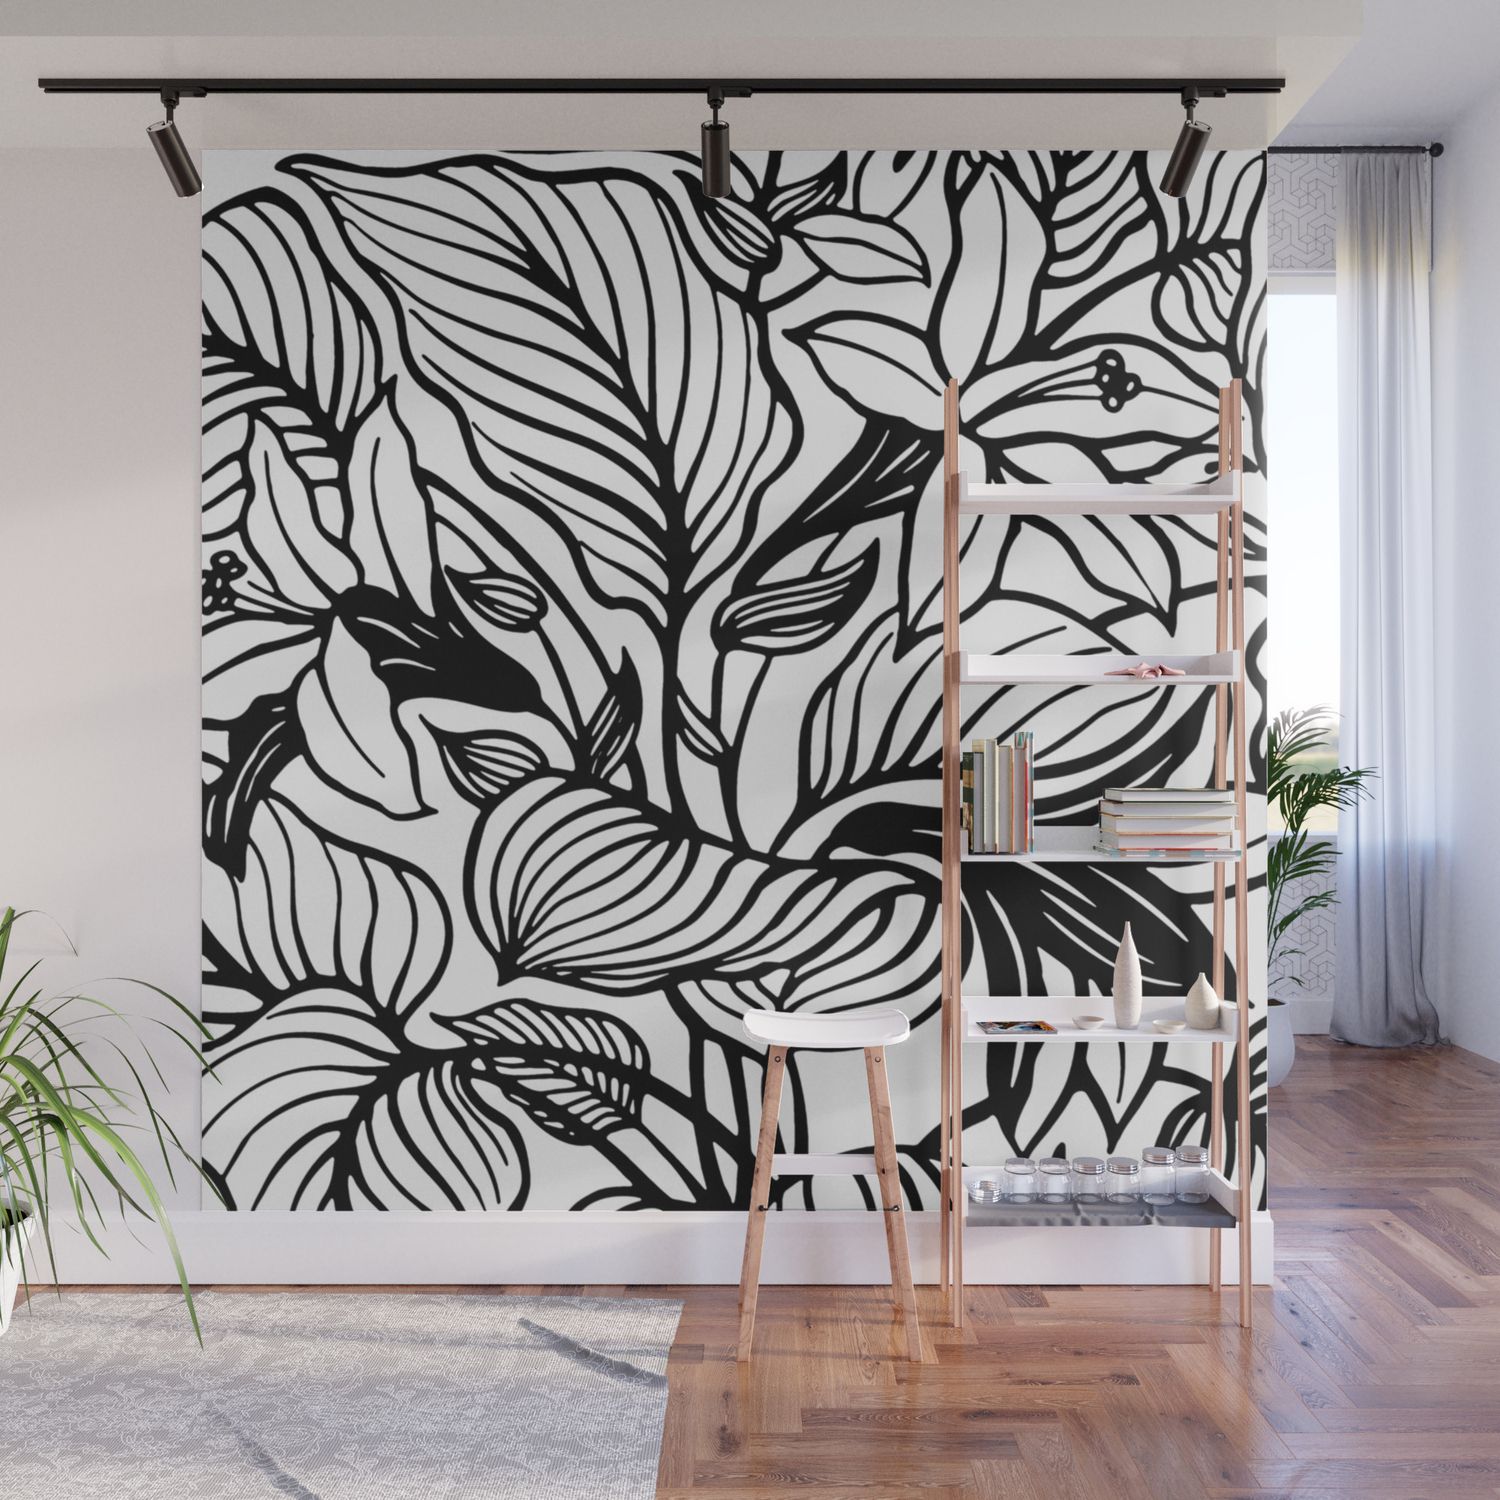 White And Black Floral Minimalist Line Drawing Wall Muralbeautiful  Homes Usa | Society6 Within Latest Black Minimalist Wall Art (Gallery 13 of 20)